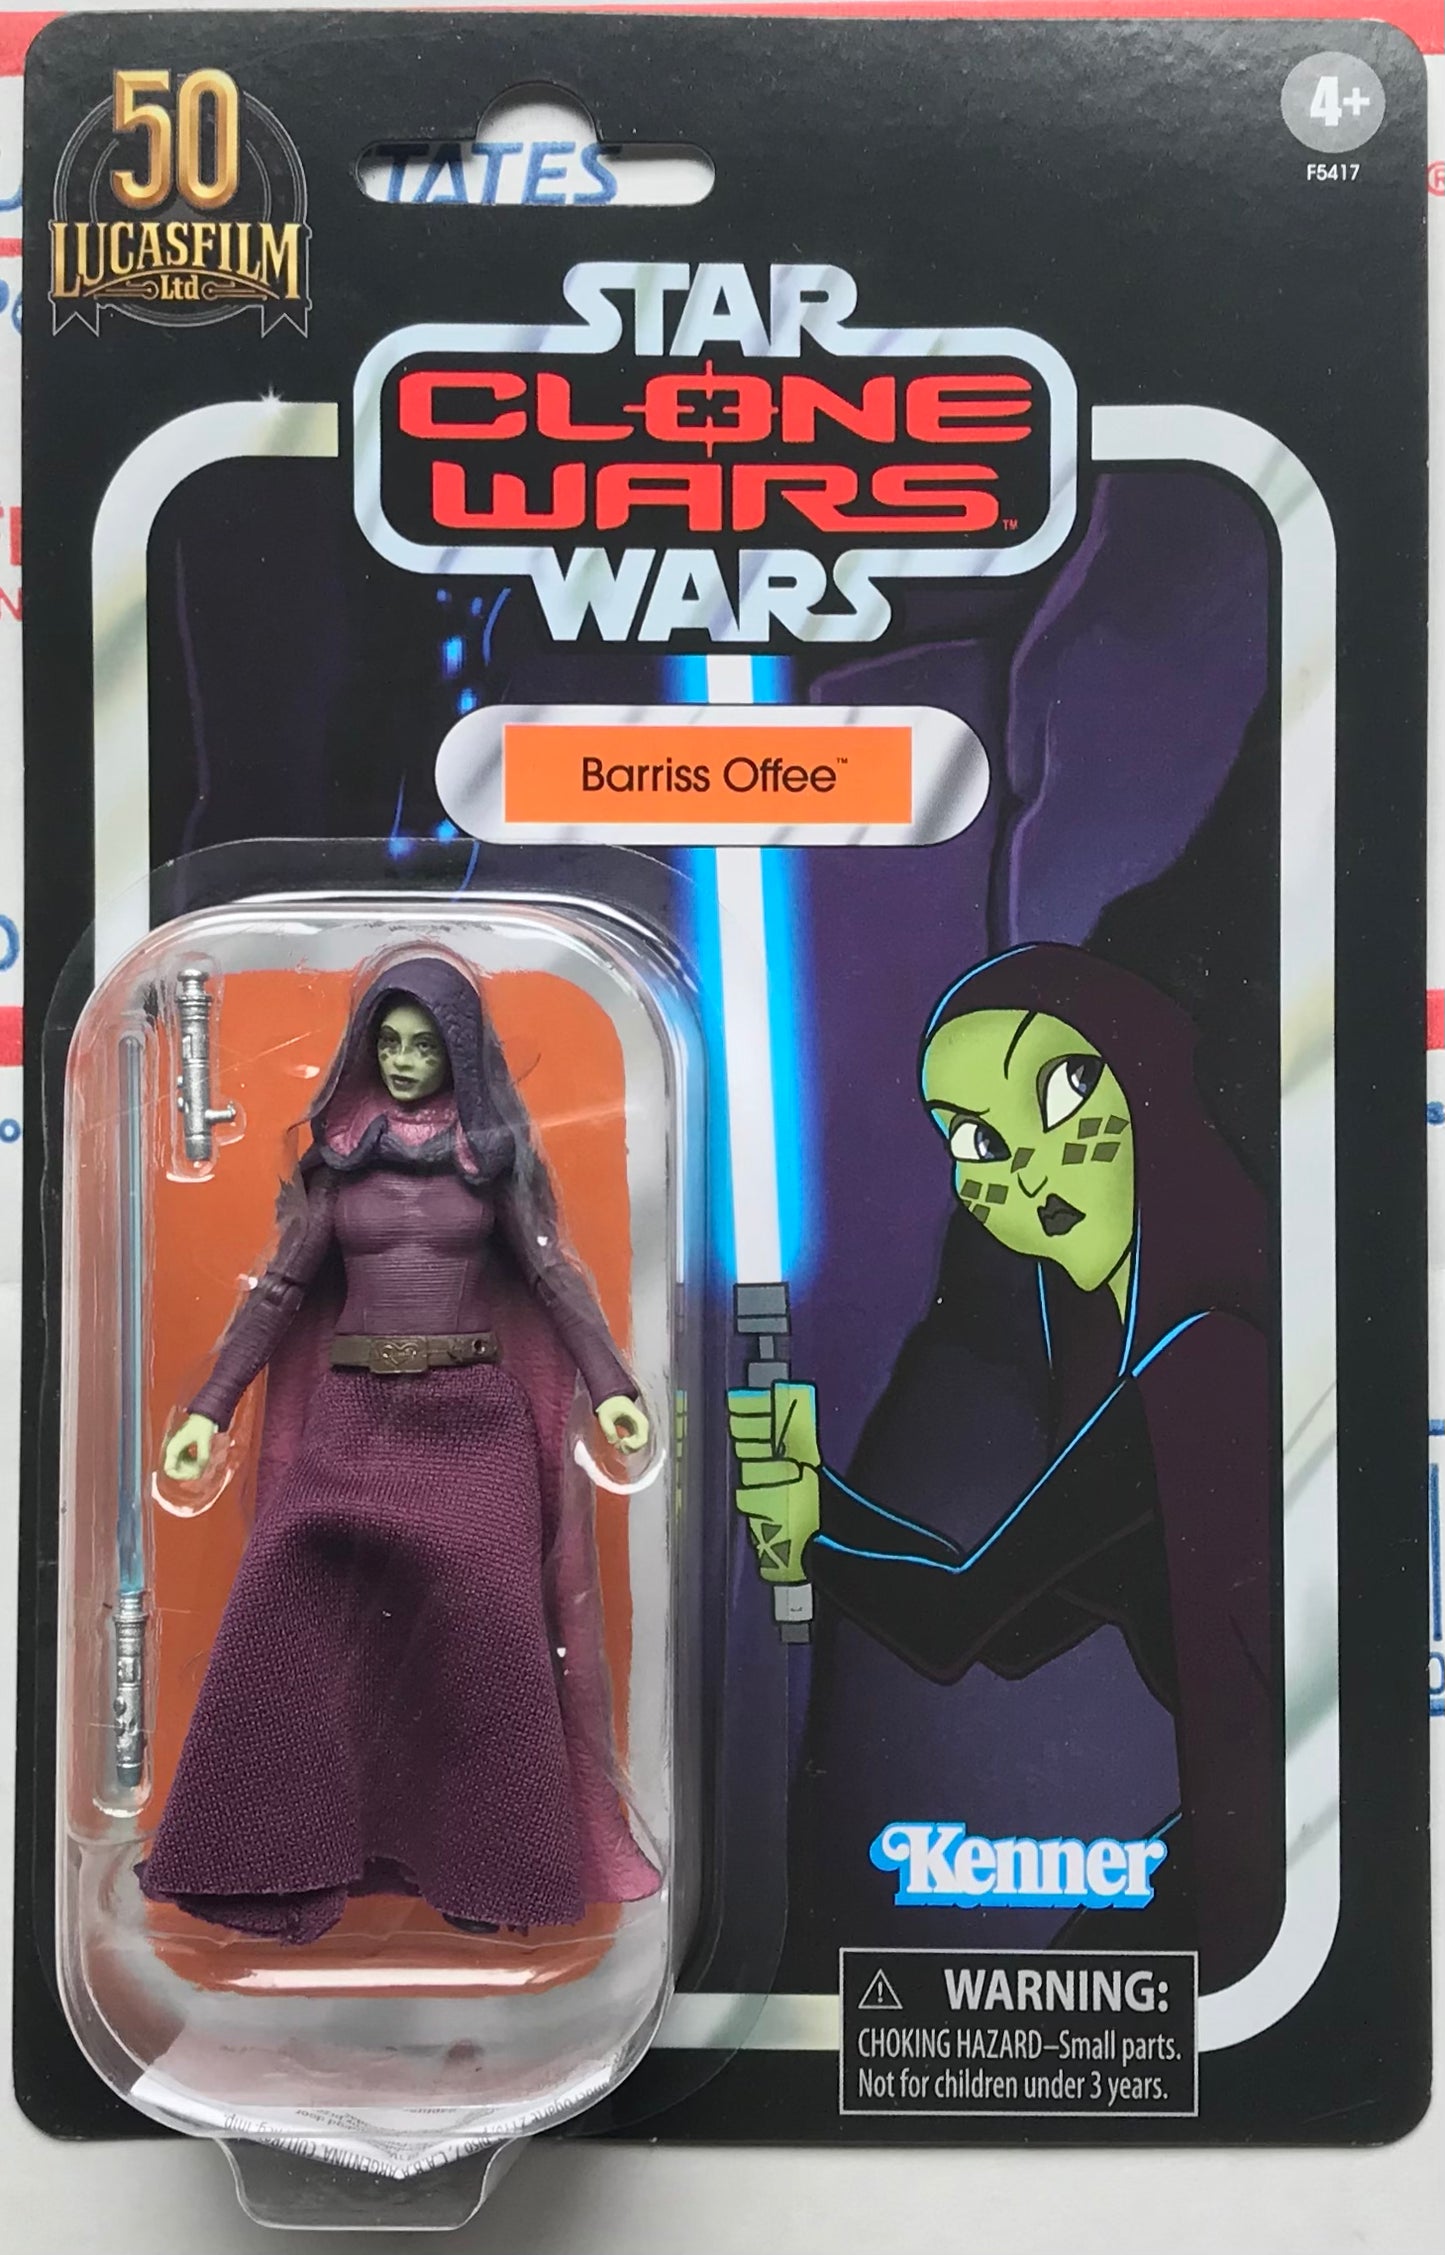 Star Wars The Clone Wars The Vintage Collection Barriss Offee 3 3/4-Inch Kenner Figure 50th